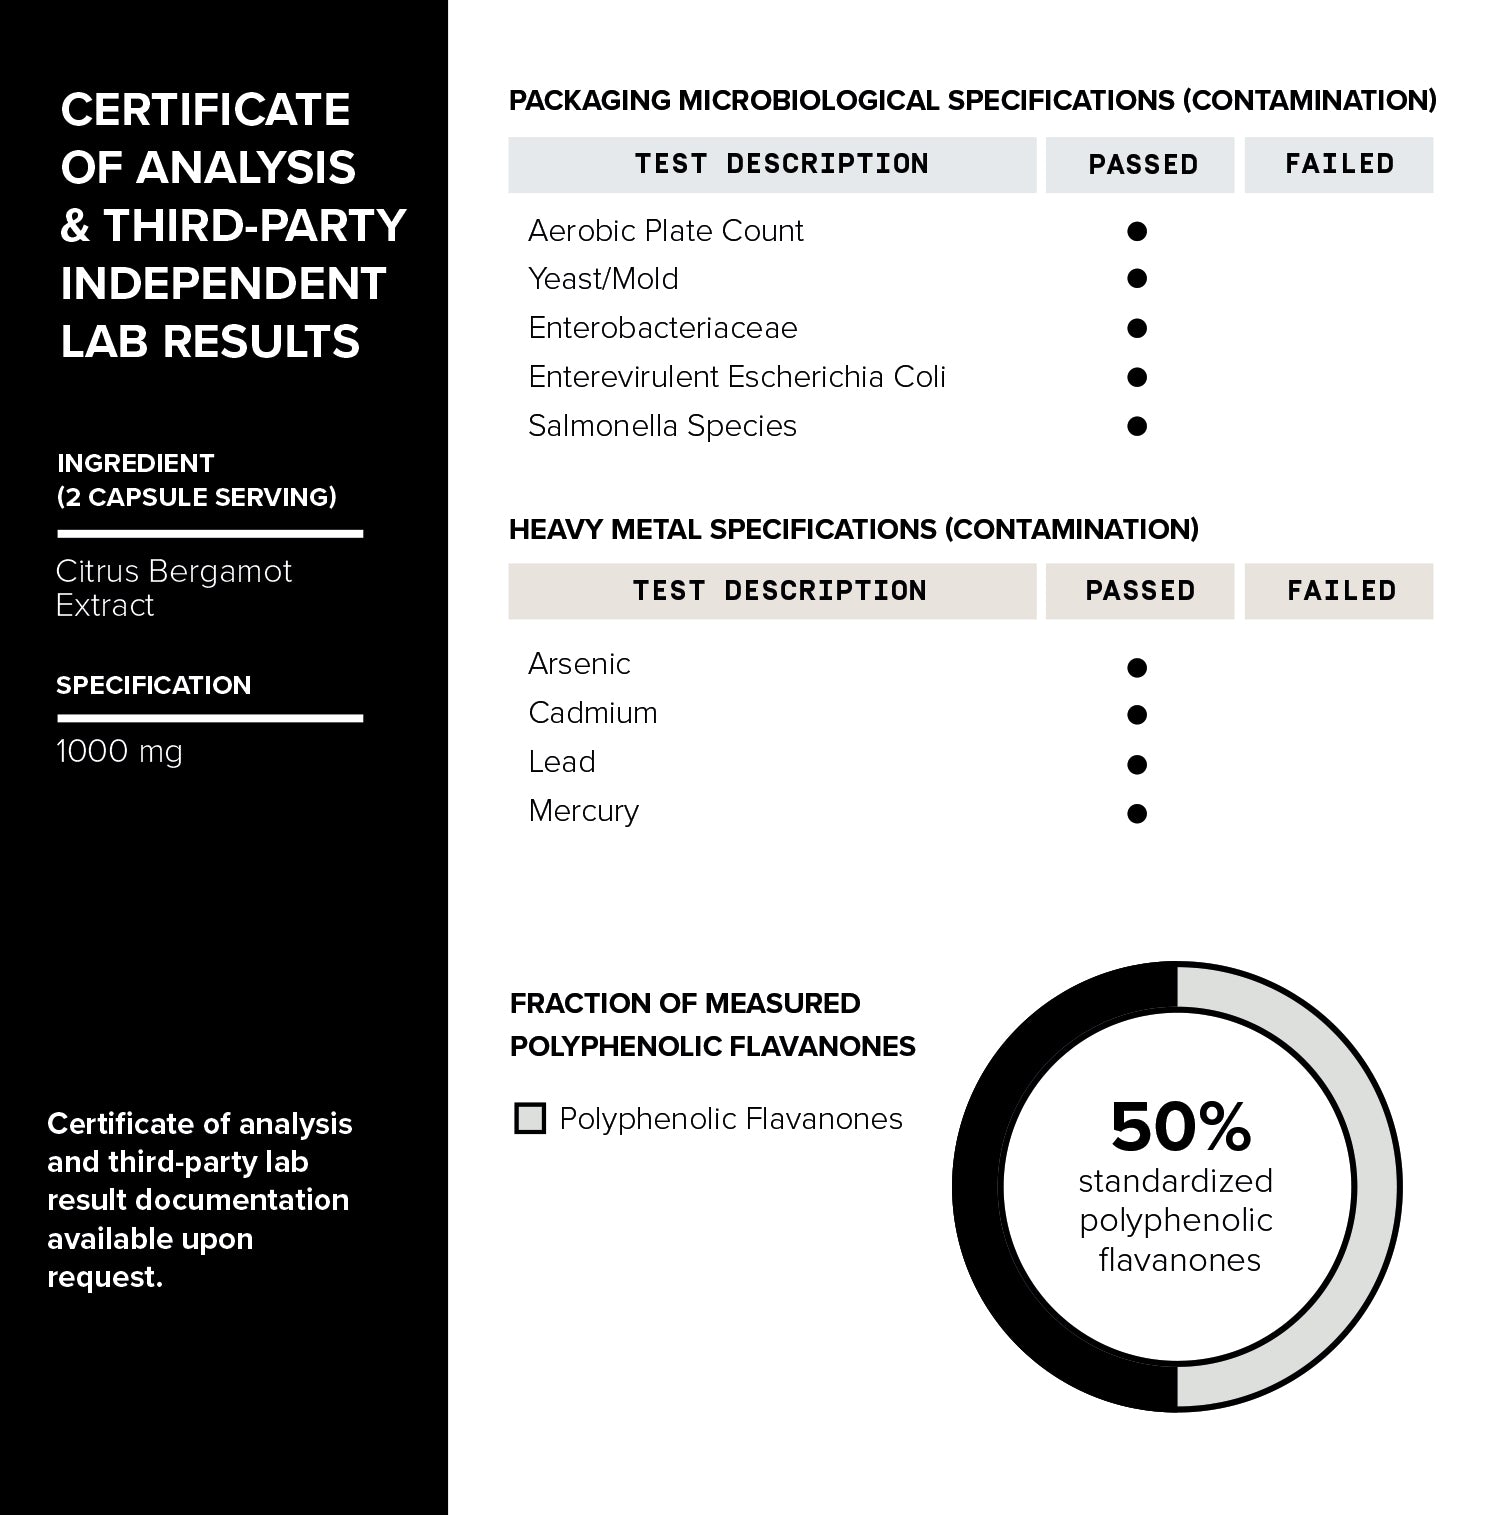 Certificate of analysis and third party independent lab results